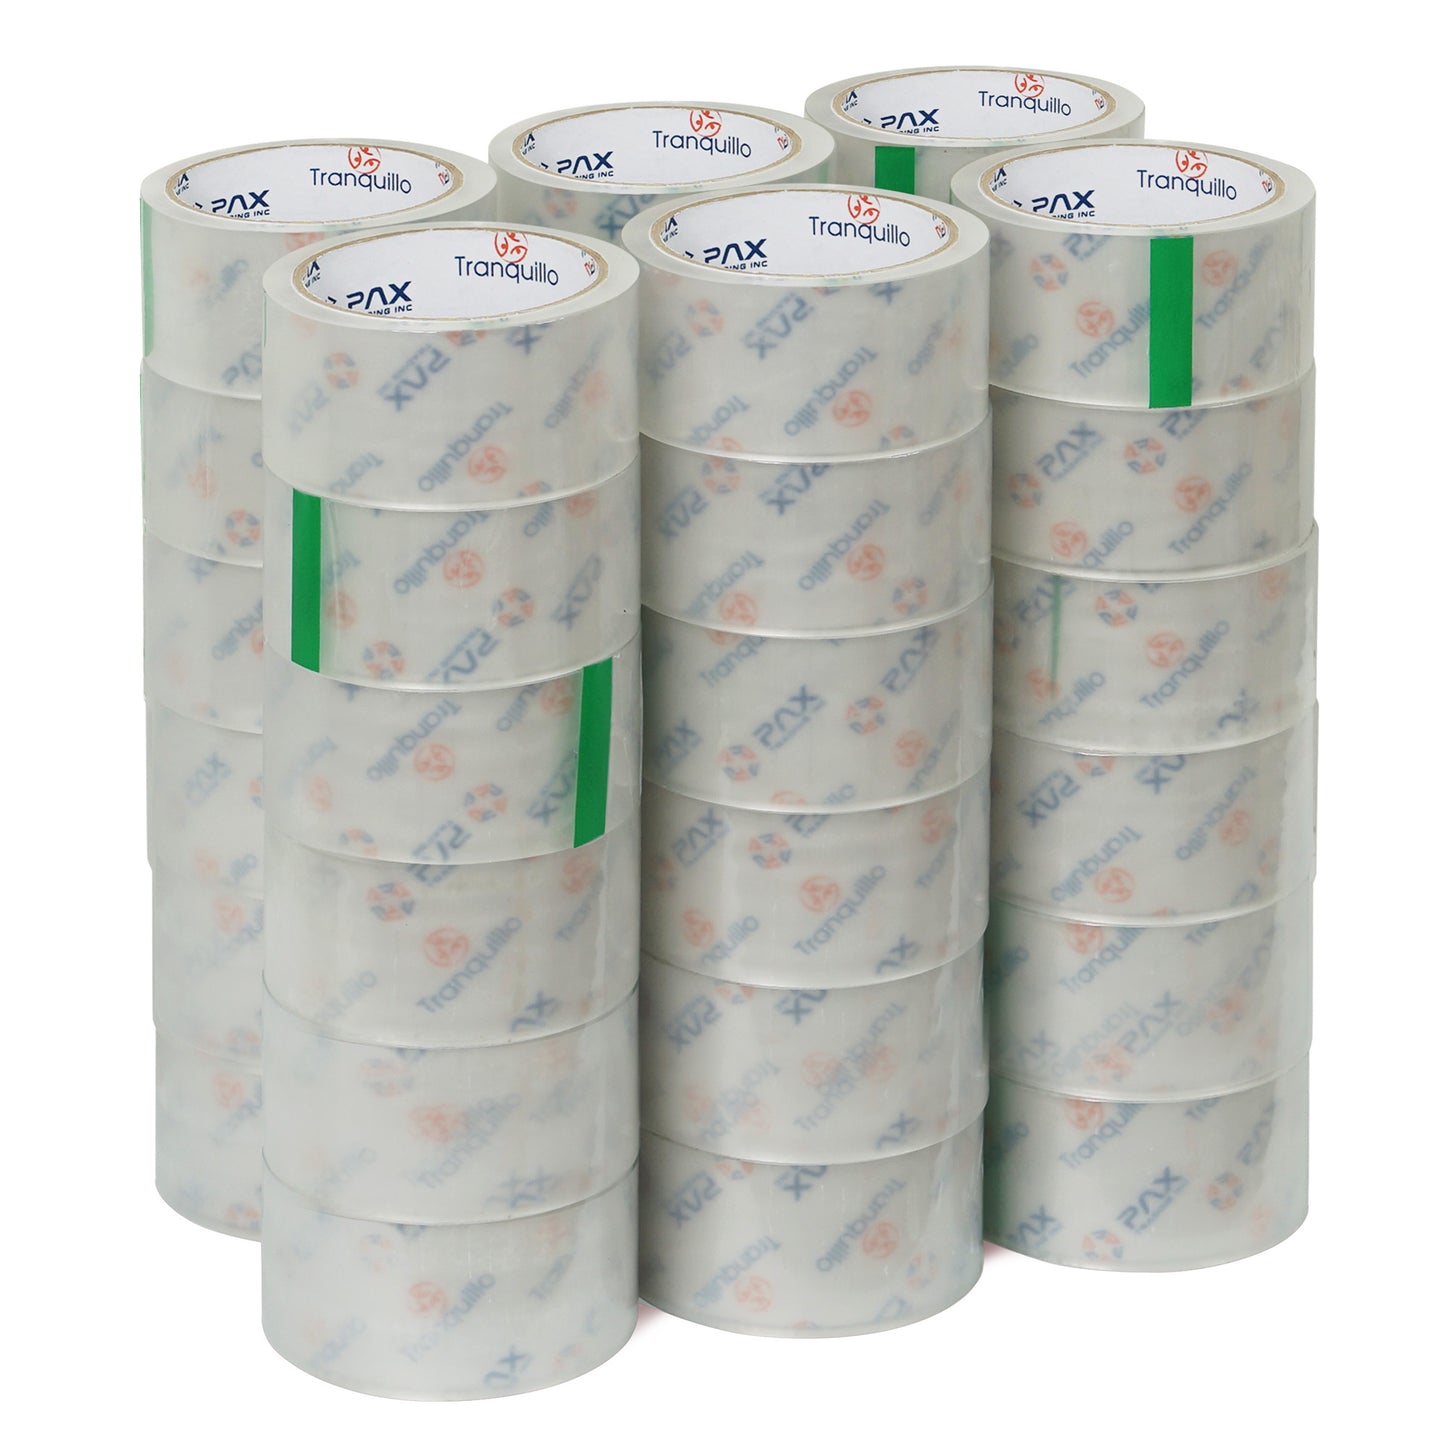 72 clear tape rolls 110 yards Wholesale Price